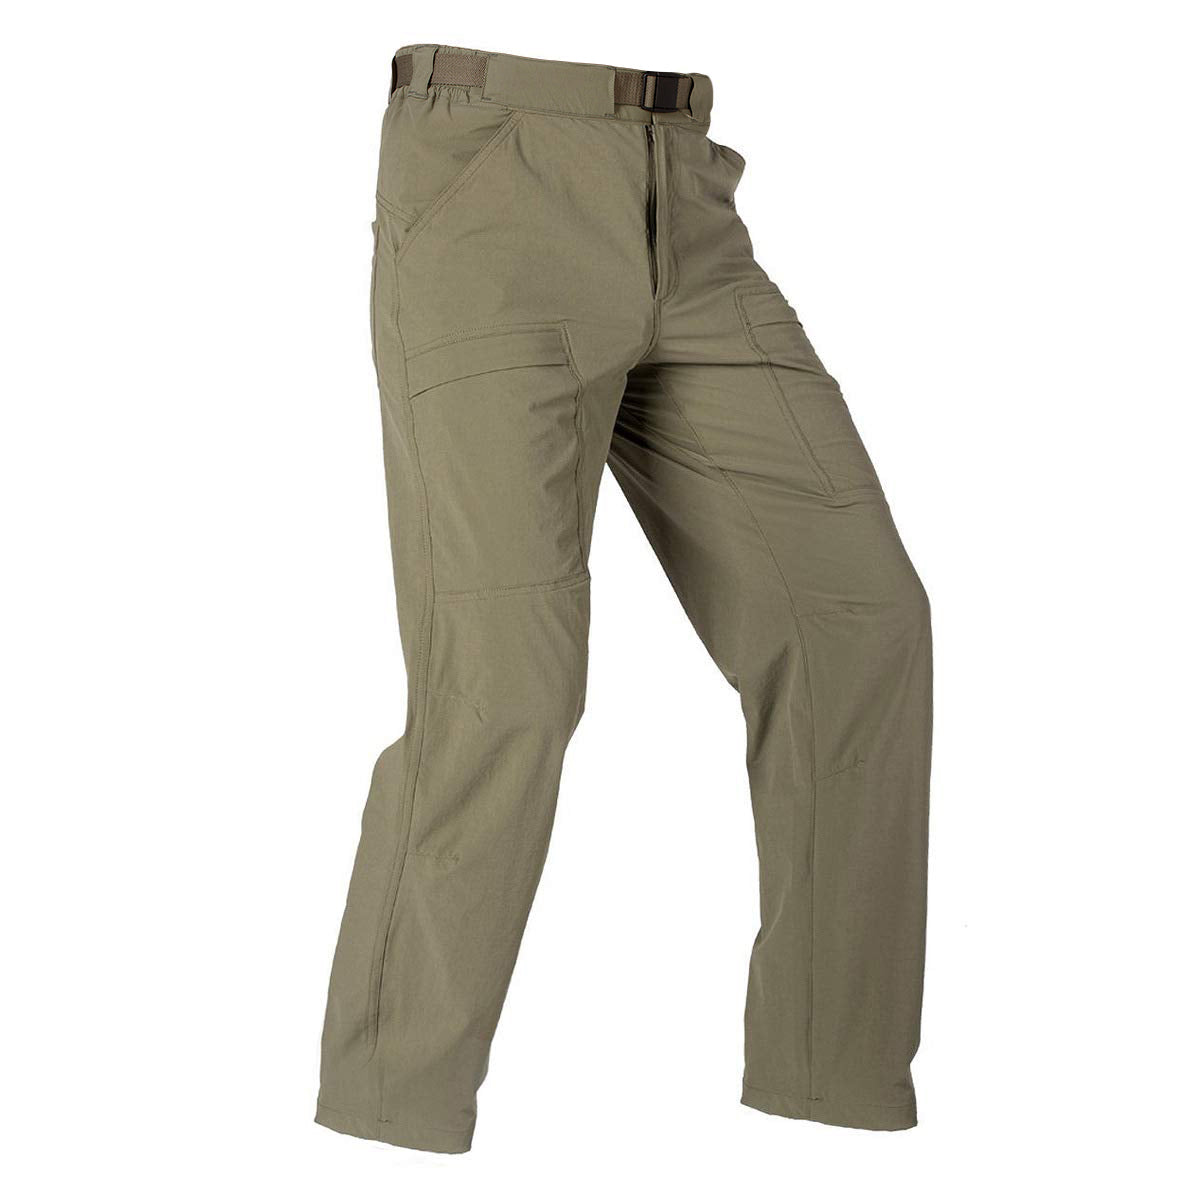 Tactical Camo Woodland Milcot Military Style Pants - Army Supply Store  Military